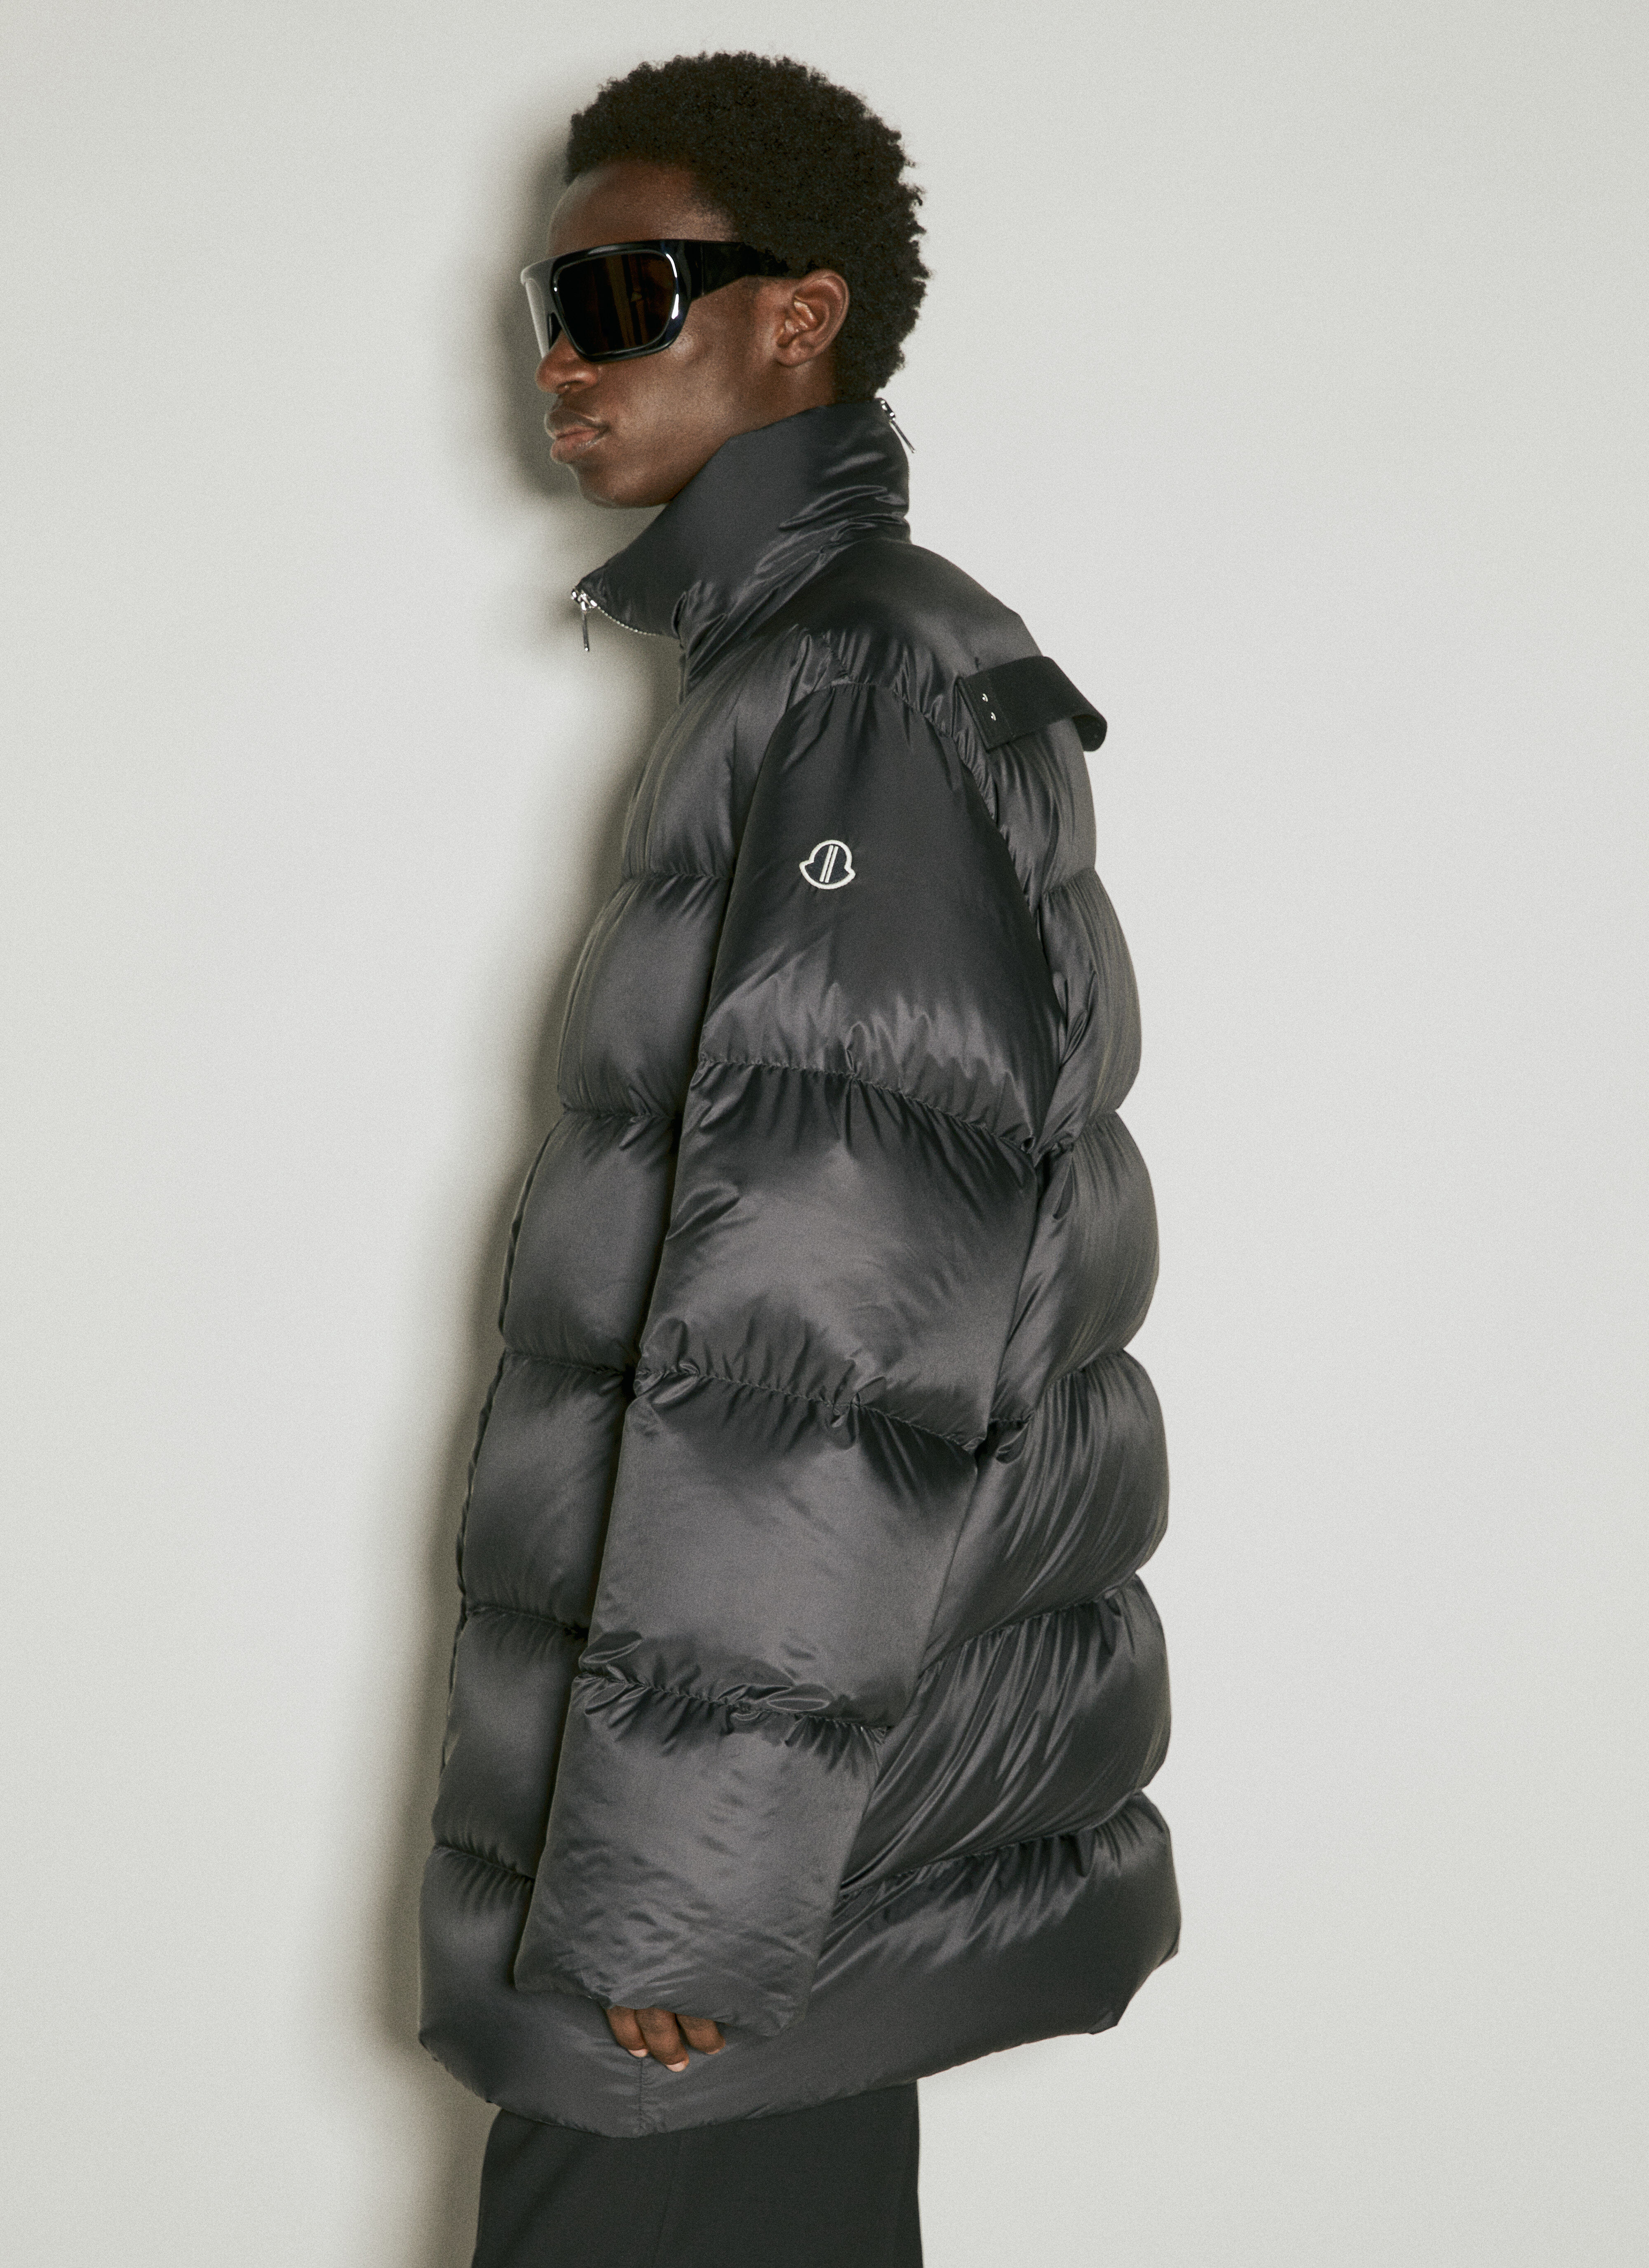 Moncler x Roc Nation designed by Jay-Z Cyclopic Long Down Coat Black mrn0156002